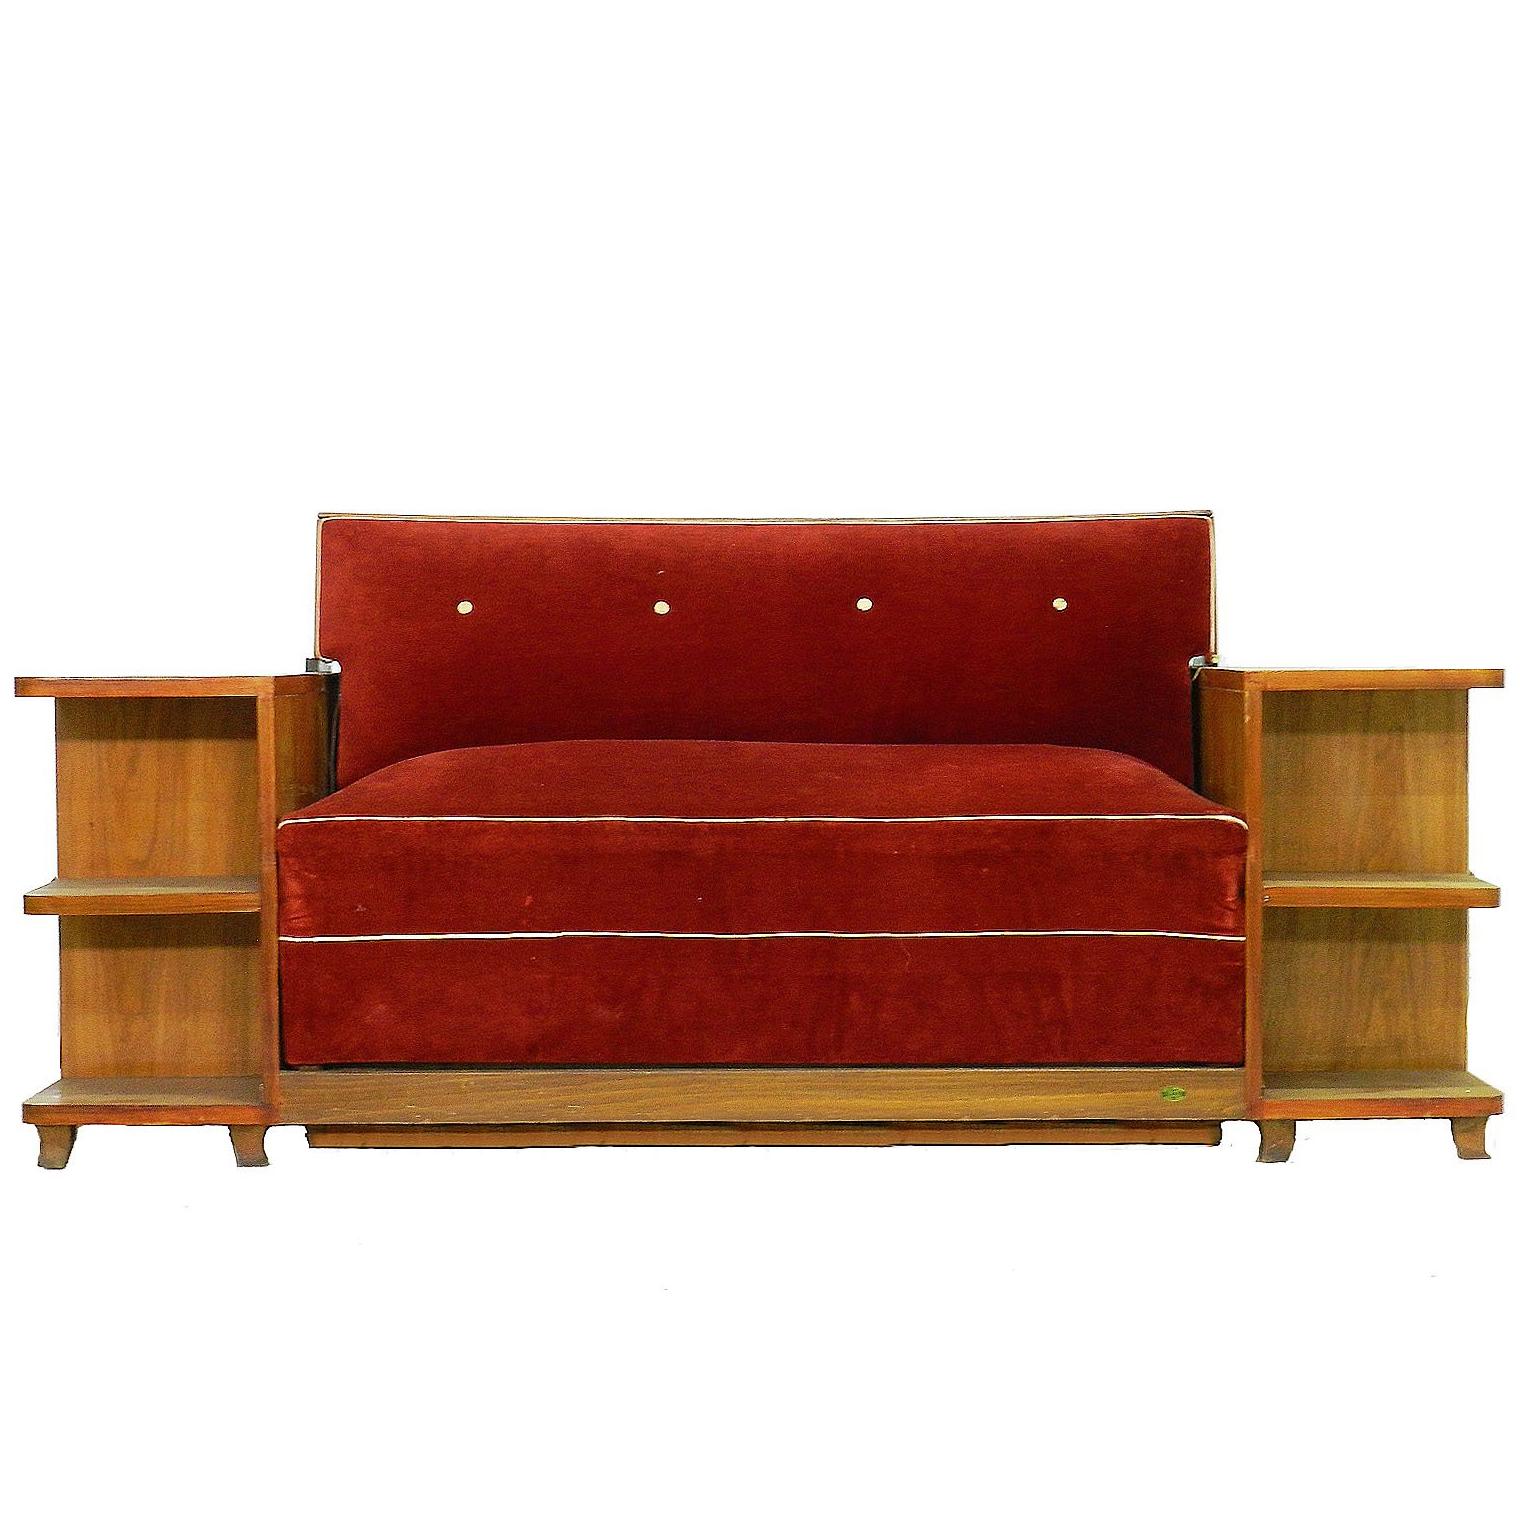 Art Deco Sofa French Canapé Bed with Integrated Cabinets and Shelves c1930